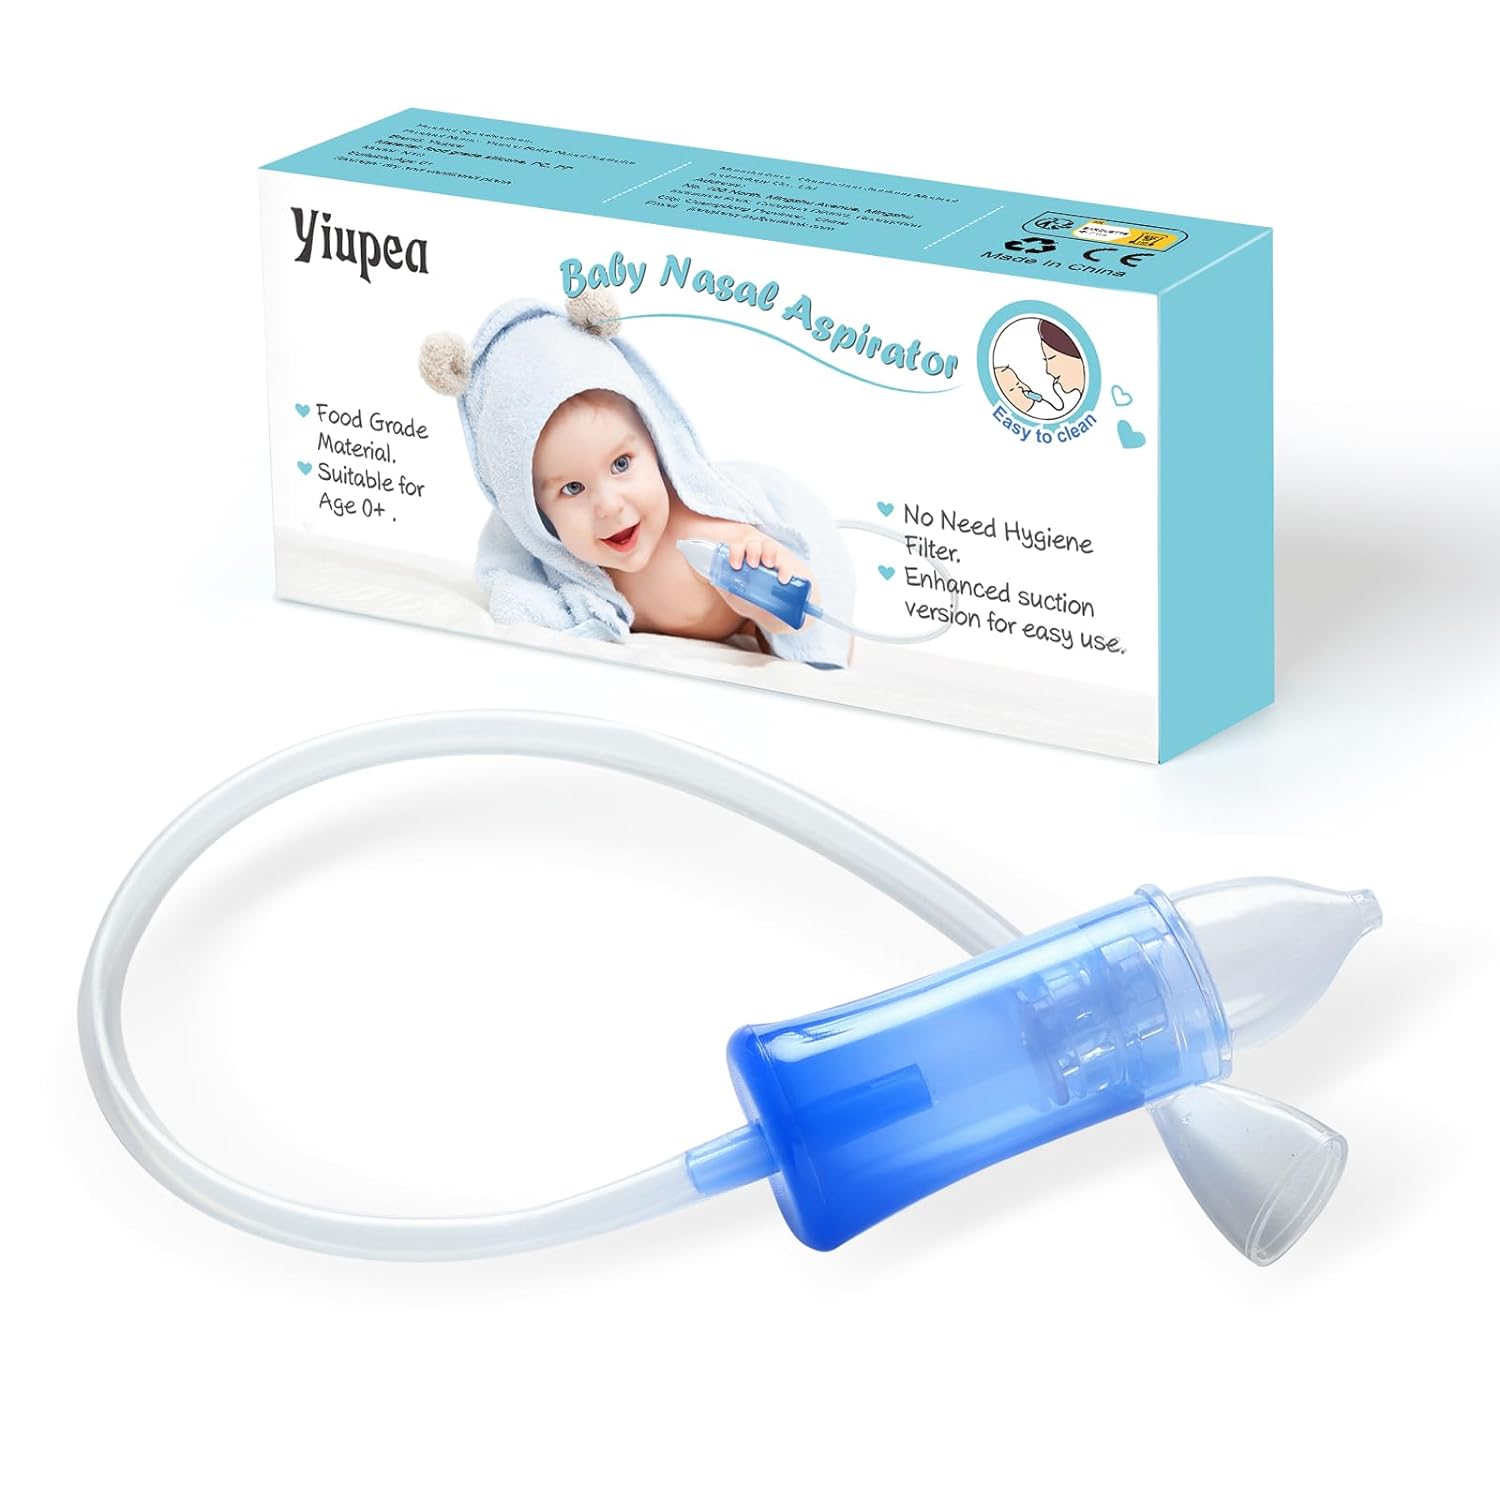 Baby Nasal Aspirator  No Need Hygiene Filter, Baby Shower Gift,Reusable Nose Cleaner with Storage Case and Cleaning Brush, Soft Silicone Tips Increased Suction Version, Easy to Use and Clean